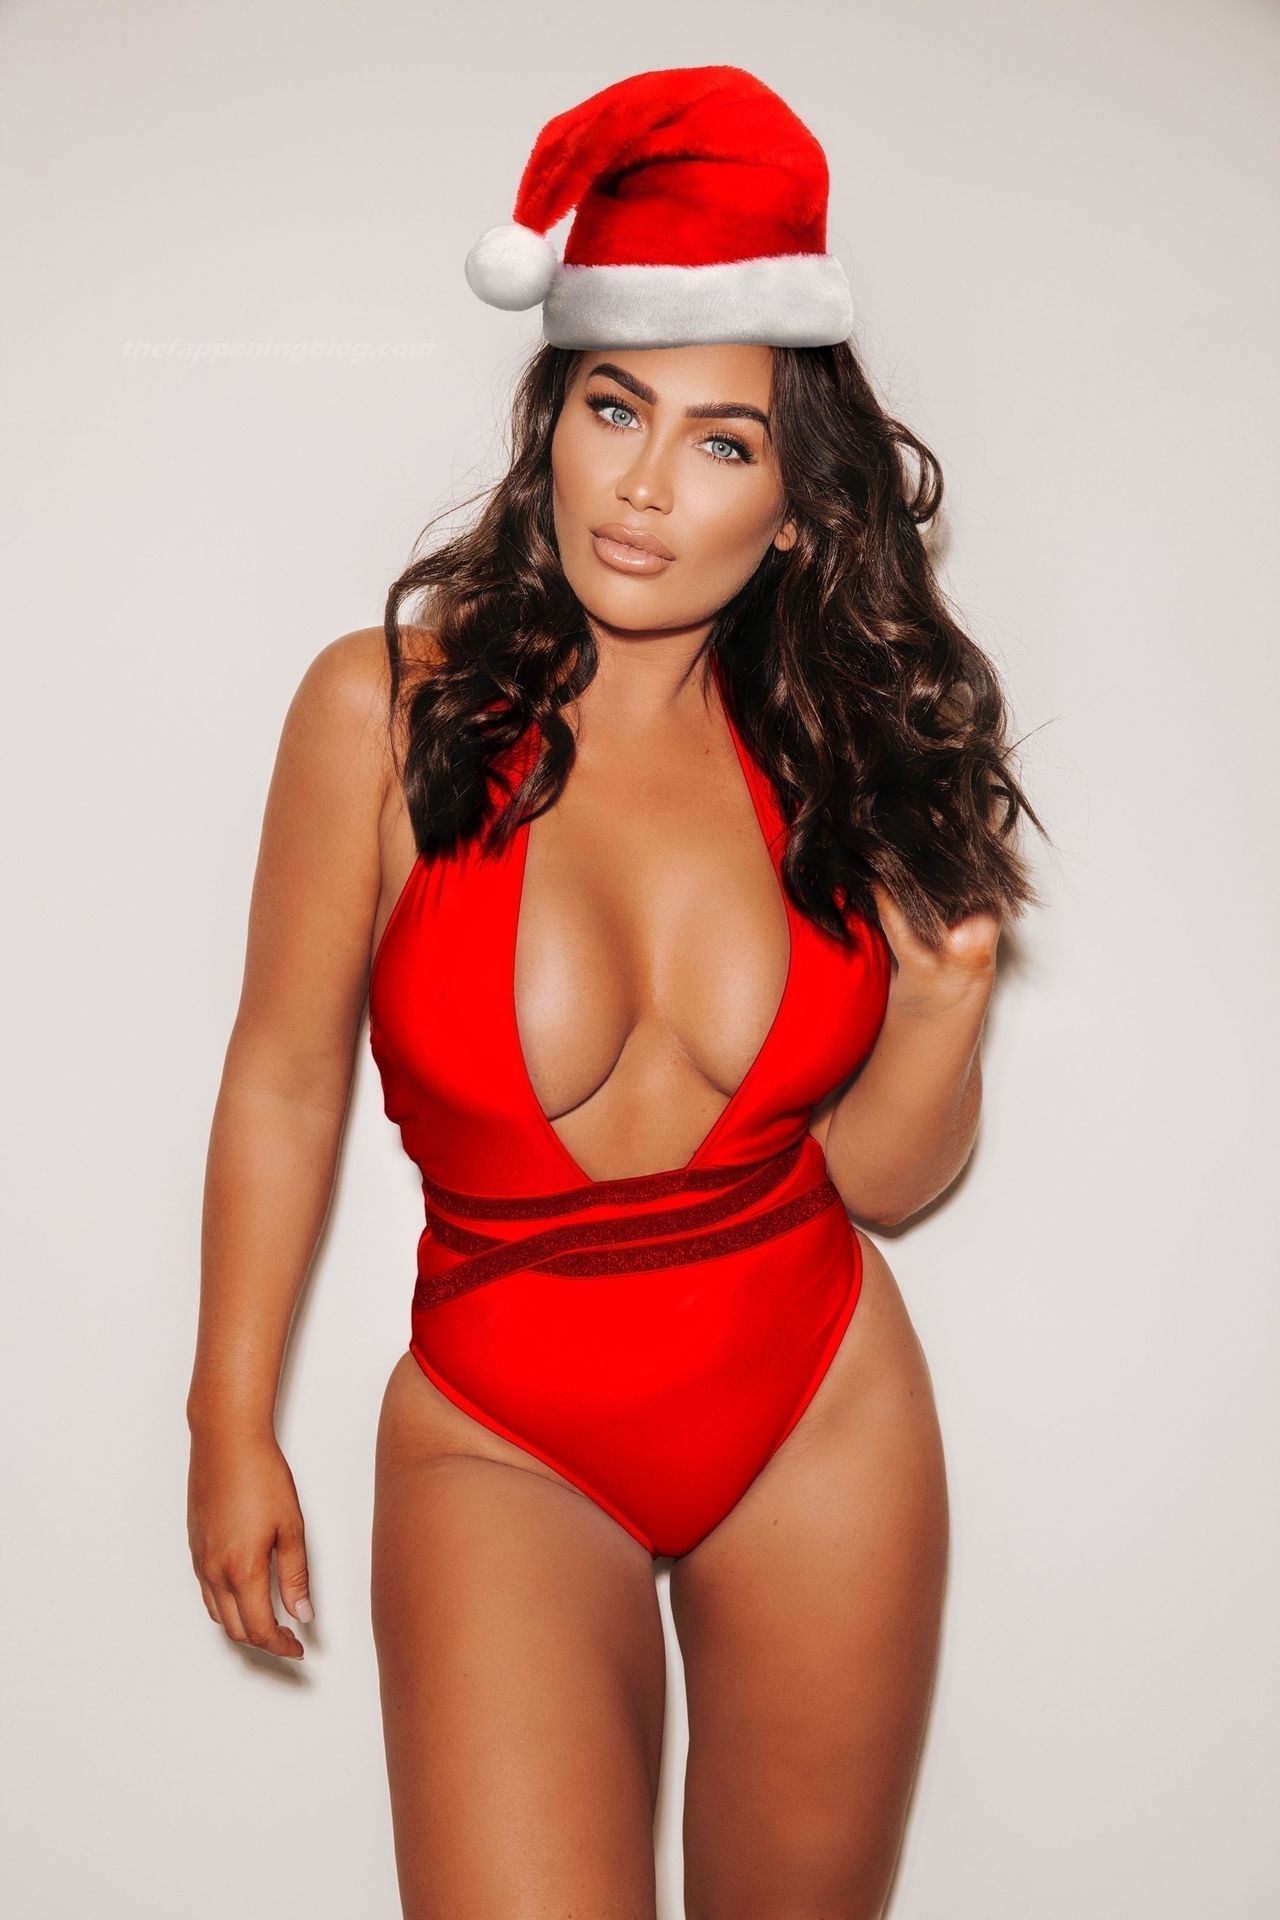 Lauren Goodger Shows Off Her Infamous Bum in a Sexy Santa Outfit (5 Photos)